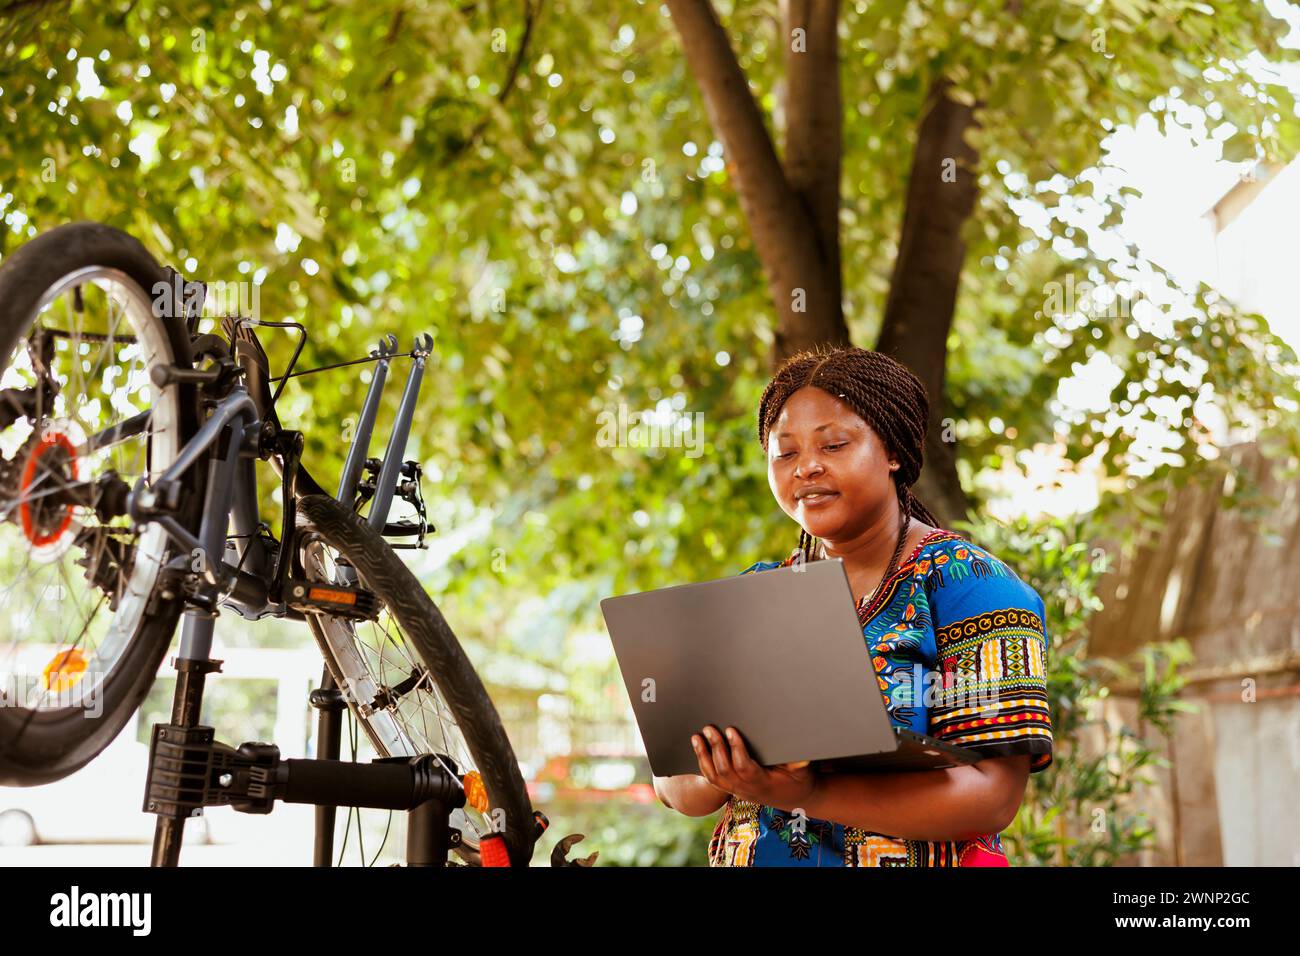 Healthy dedicated african american woman searching on laptop to fix broken modern bicycle. Active female cyclist ensures bike components are secure for summer outdoor leisure cycling. Stock Photo